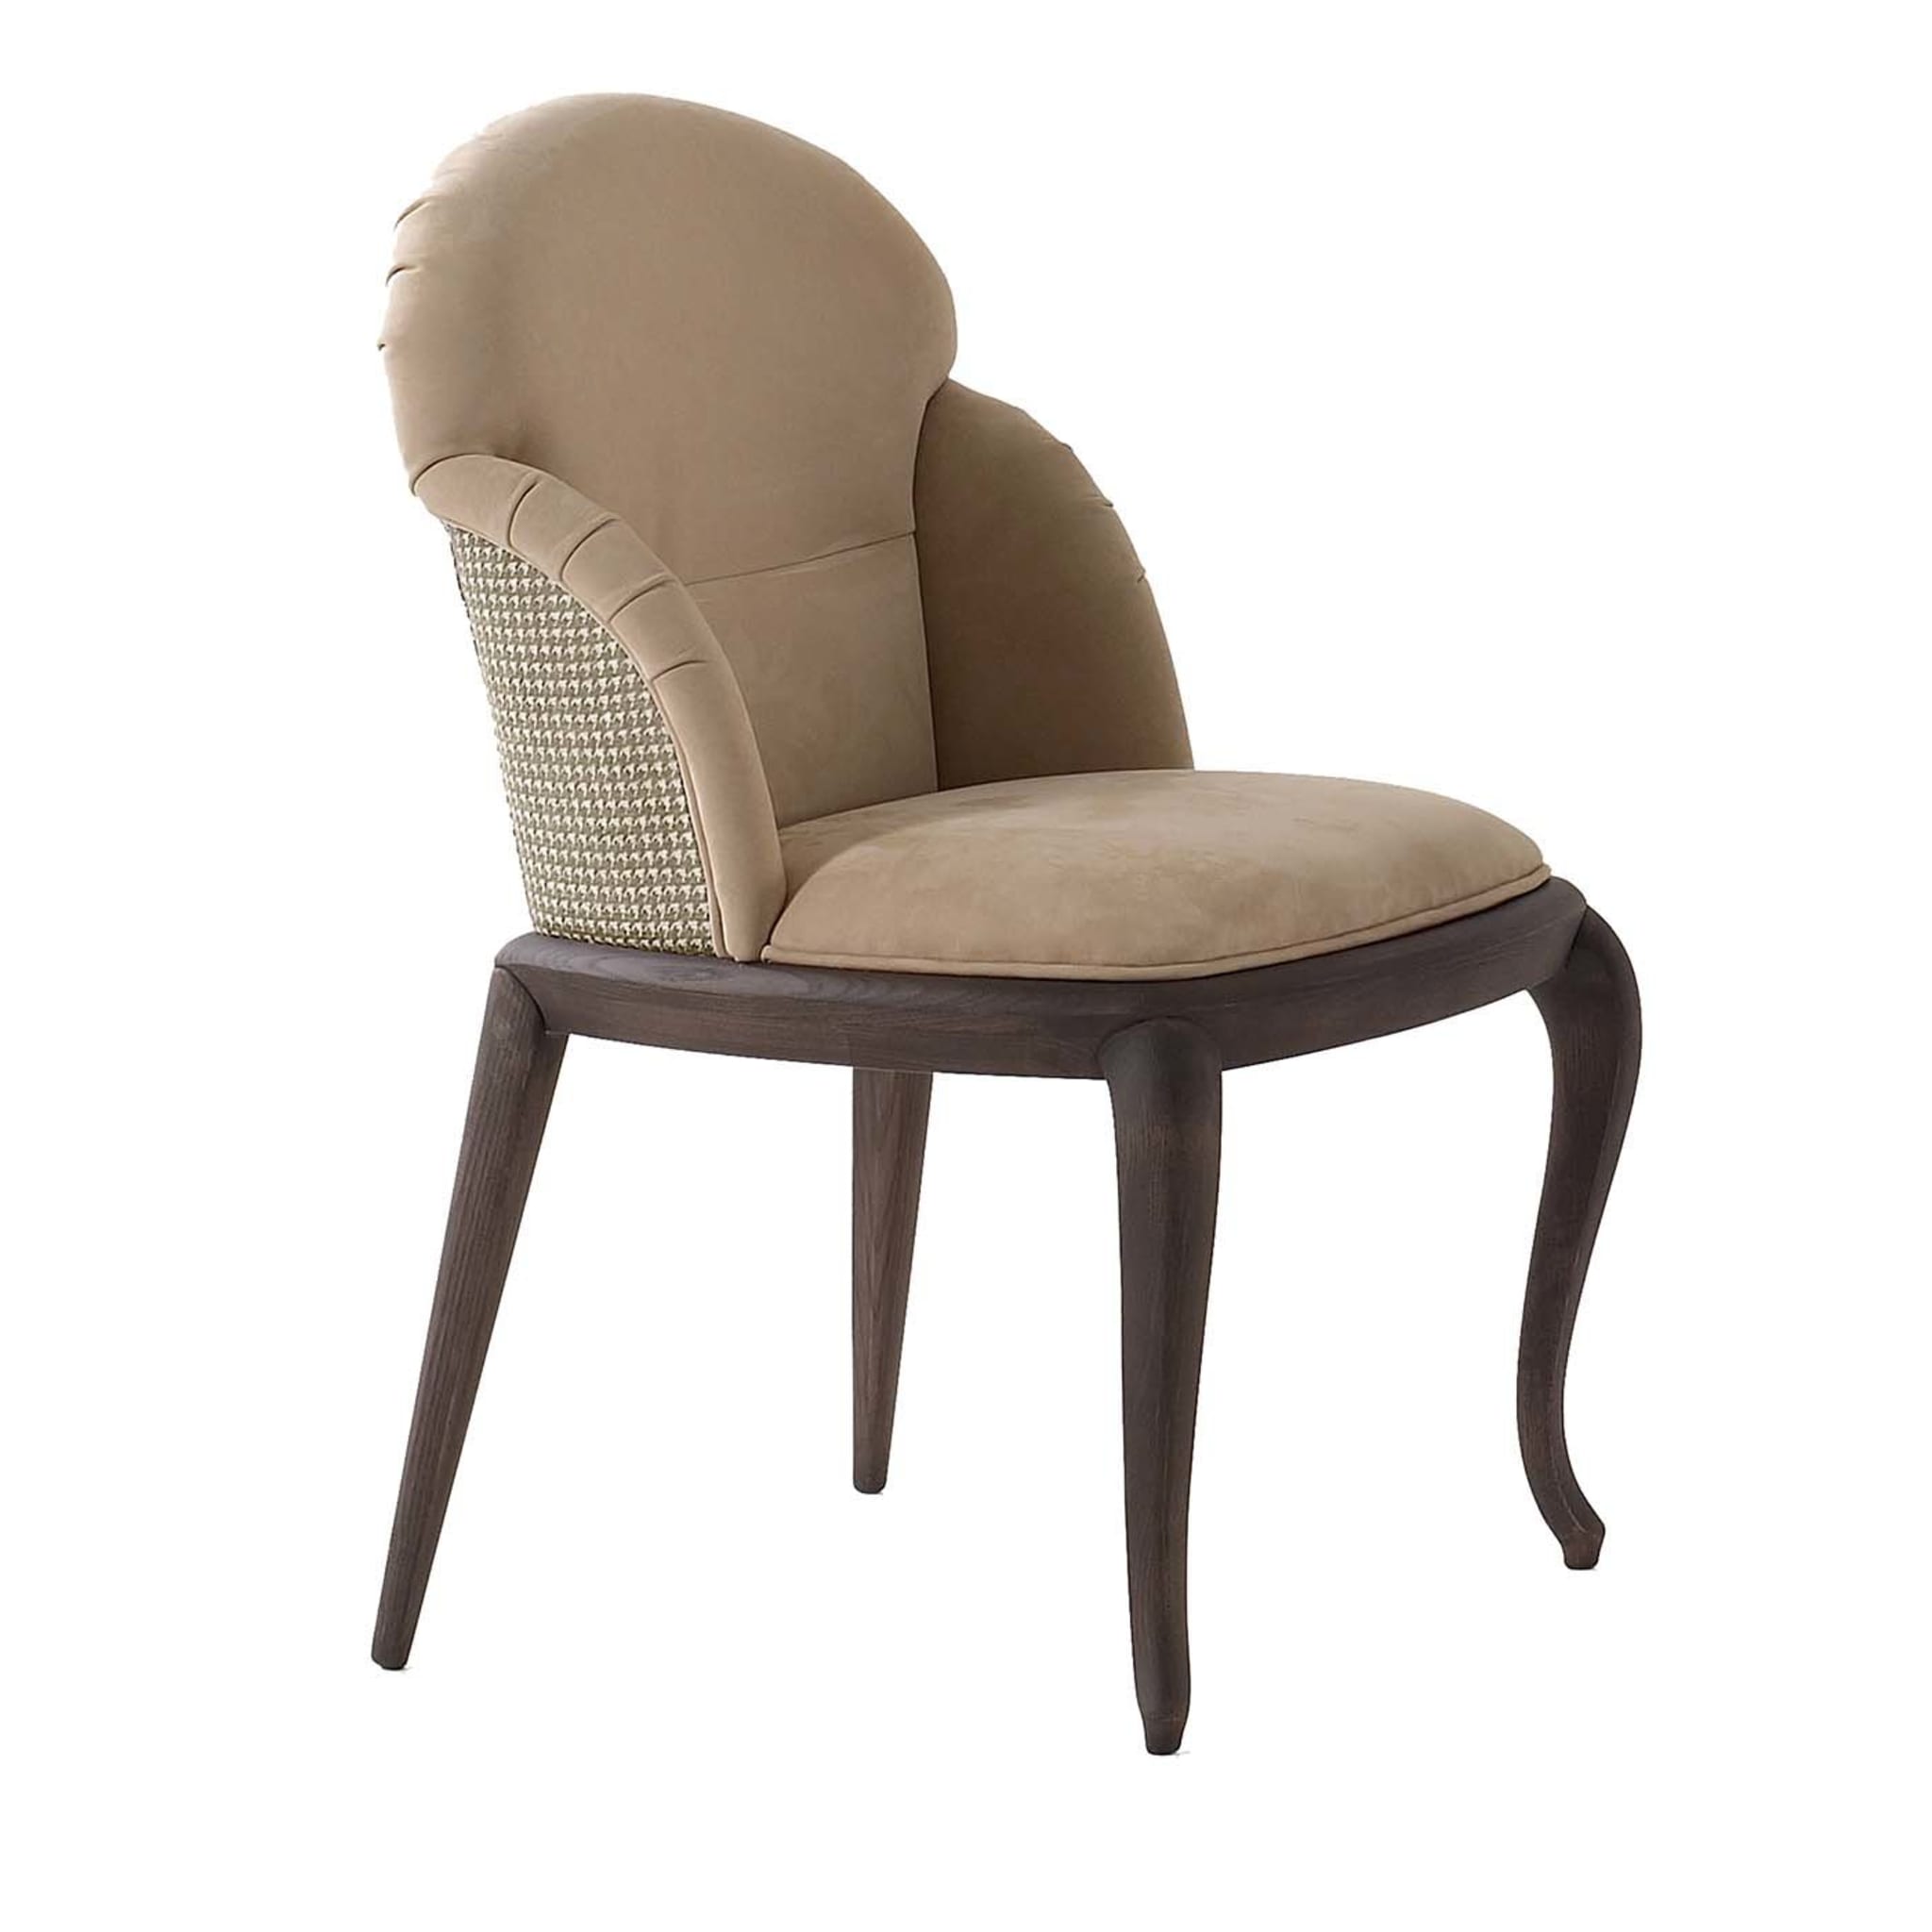 Sally Chair in Beige - Main view